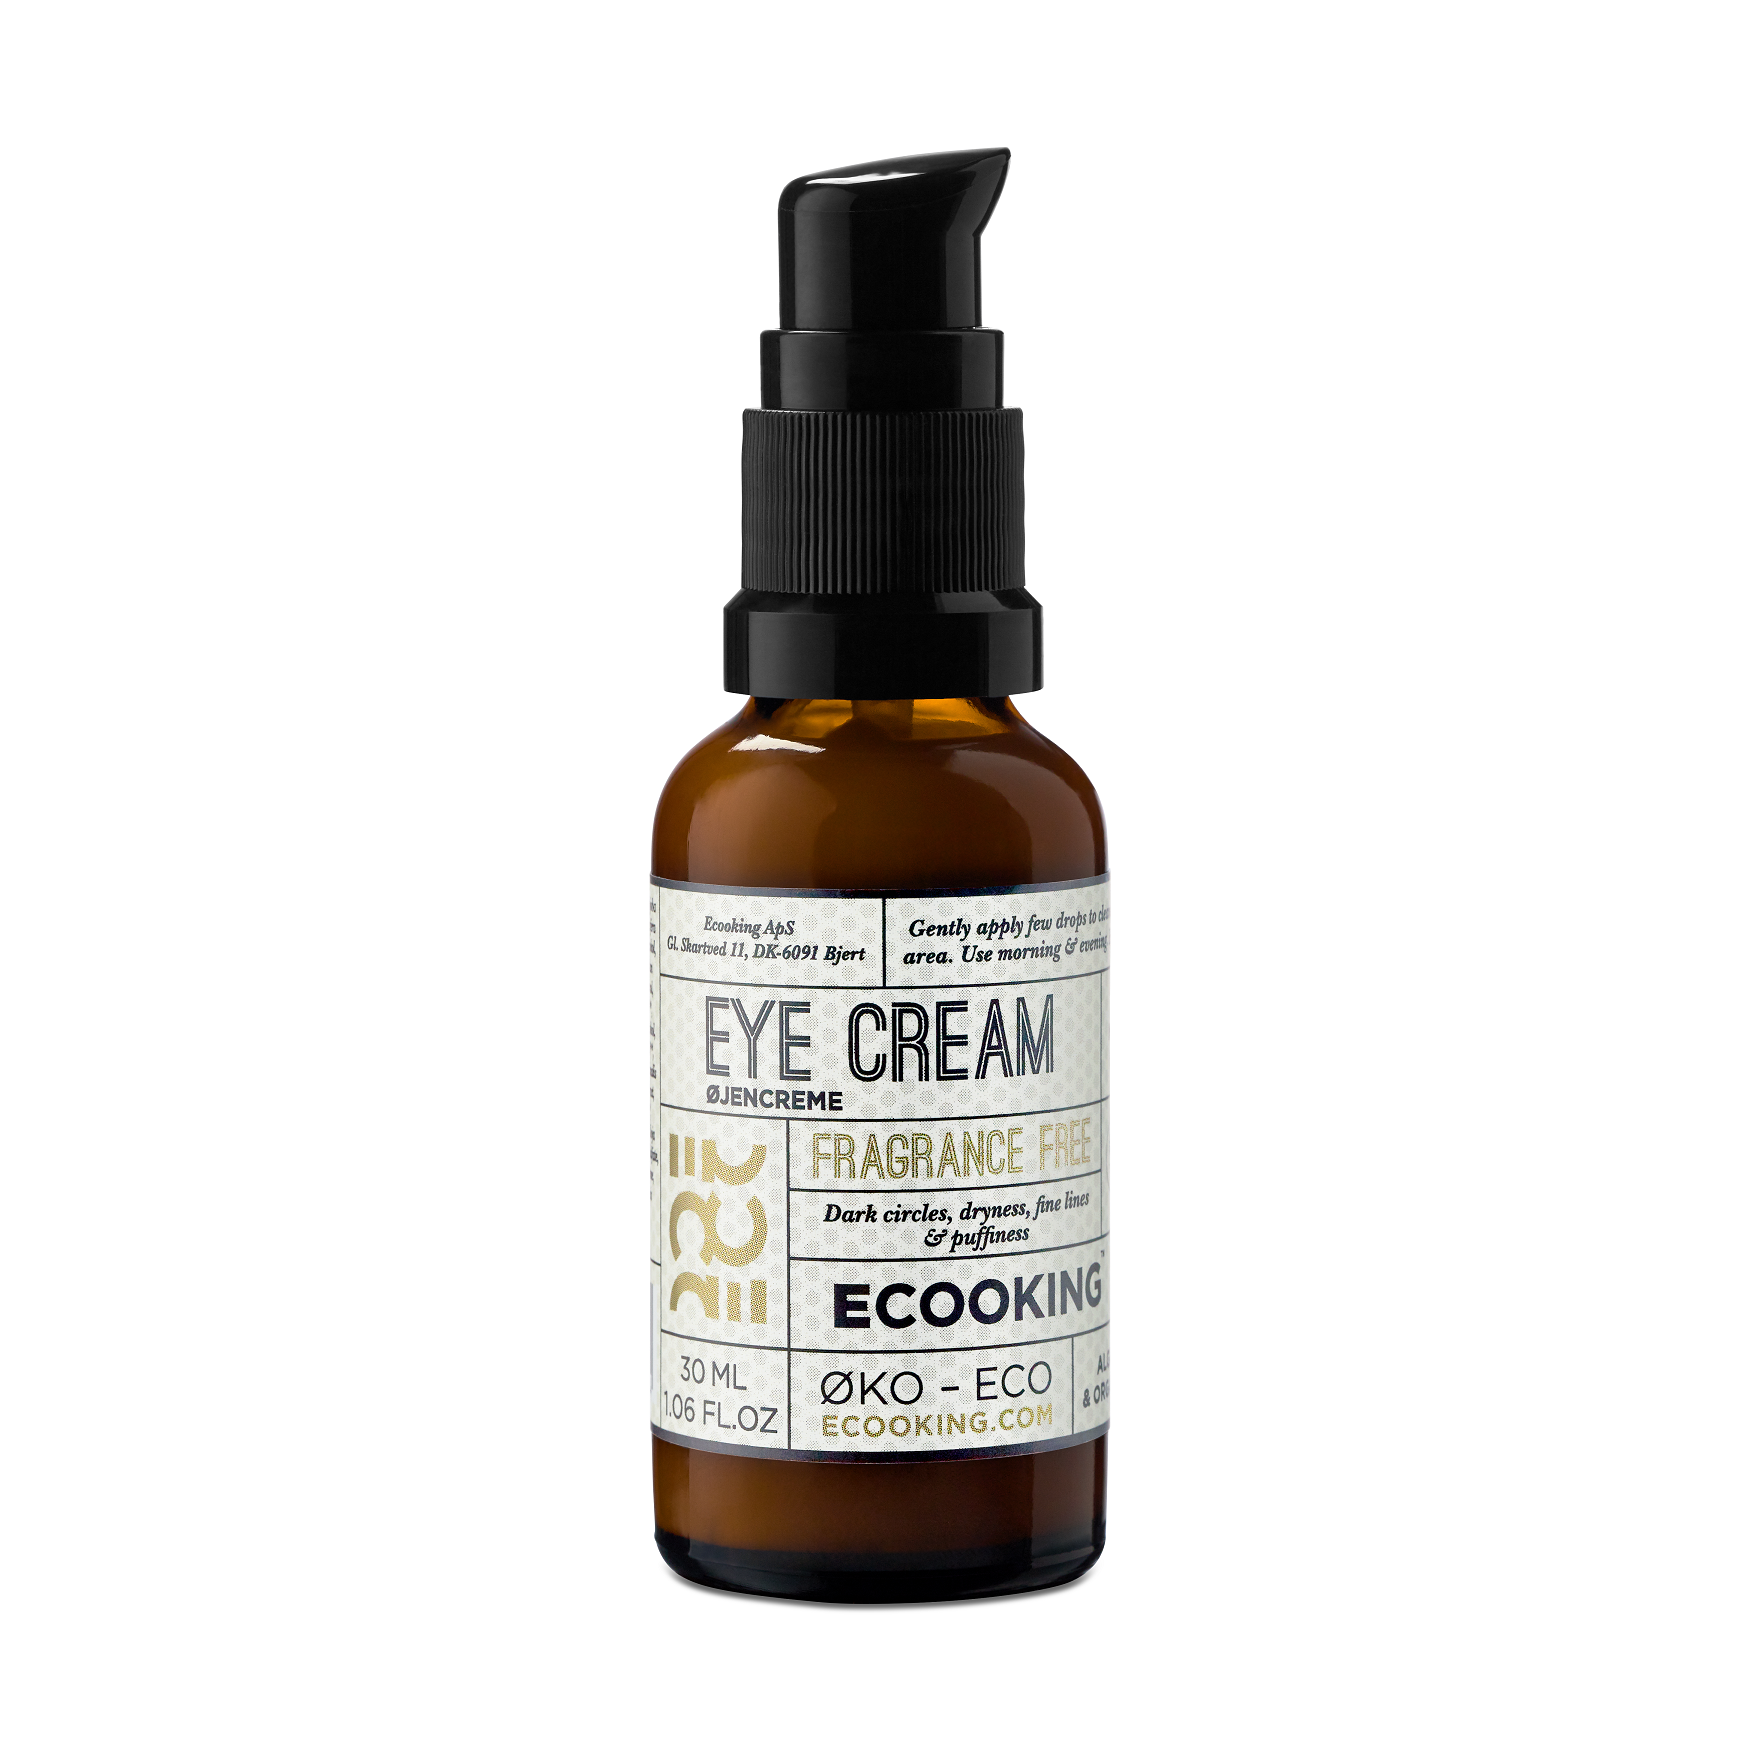 The eye cream from Ecooking is a firming and hydrating cream. The eye cream boosts your skin’s own collagen production, strengthens and protects sensitive skin around the eyes. The skin around the eyes is thinner than the rest of the face, so it needs special care. This eye cream does not only hydrate, but also reduces fine lines, dark circles and puffiness around the eyes. Keep your eyes fresh and young with Ecooking Eye cream.